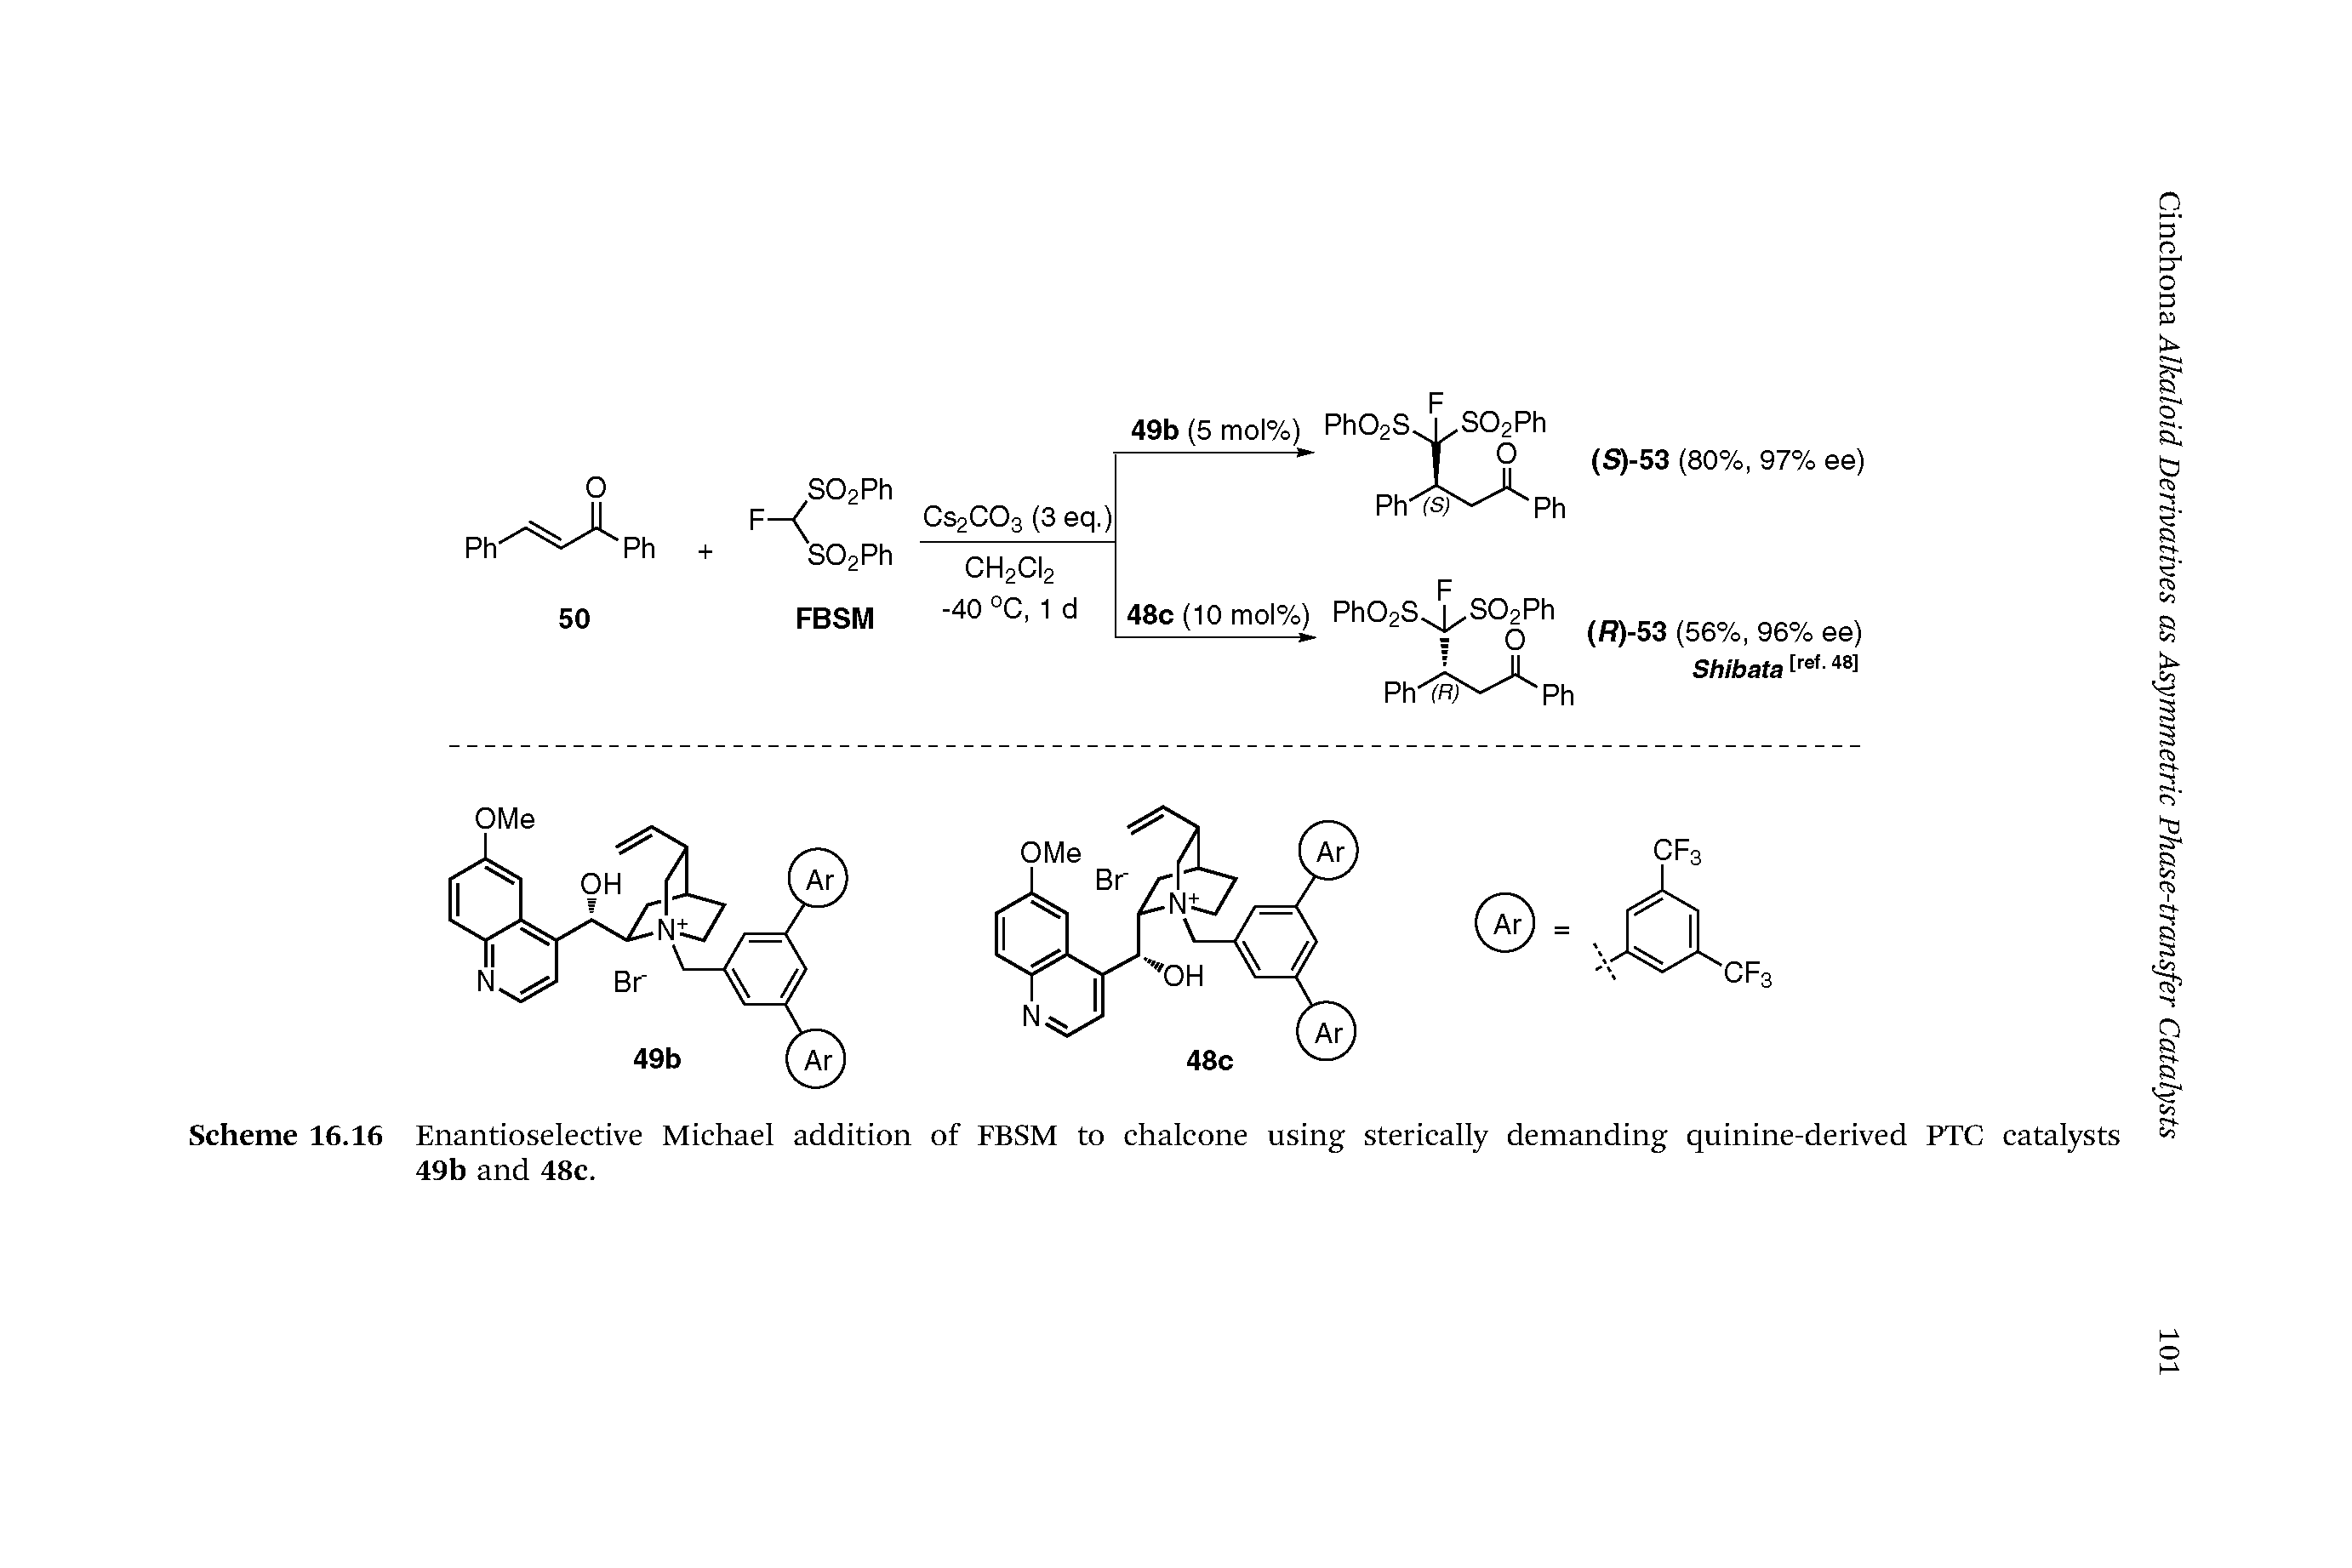 Scheme 16.16 Enantioselective Michael addition of FBSM to chalcone using sterically demanding quinine-derived PTC catalysts 49b and 48c.